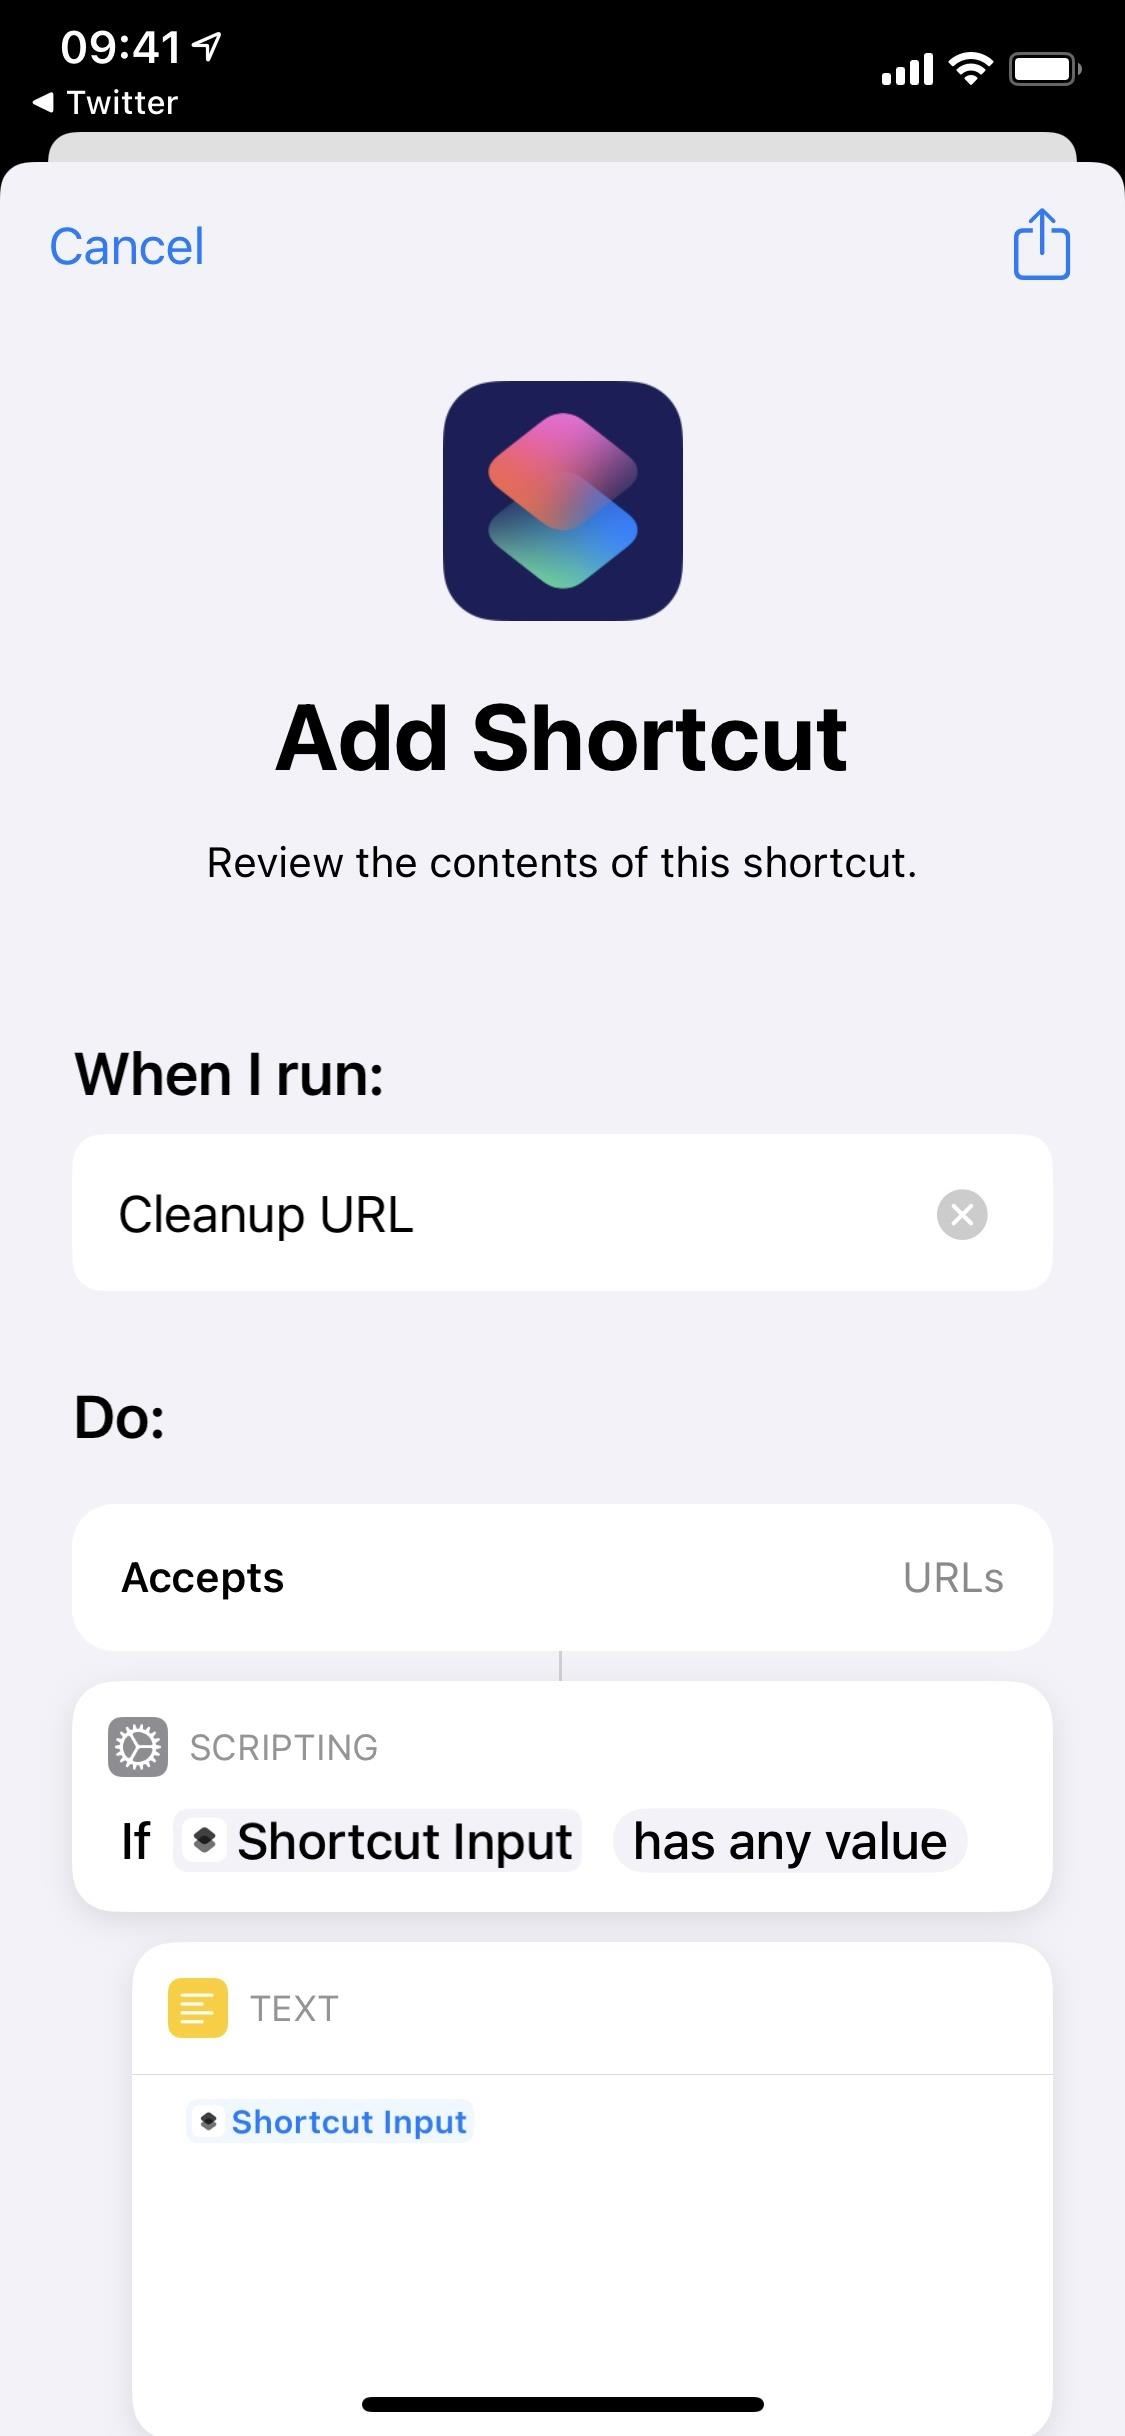 How to Auto-Remove Annoying Tracking Codes in URLs You Share from Your iPhone to Get Cleaner Links